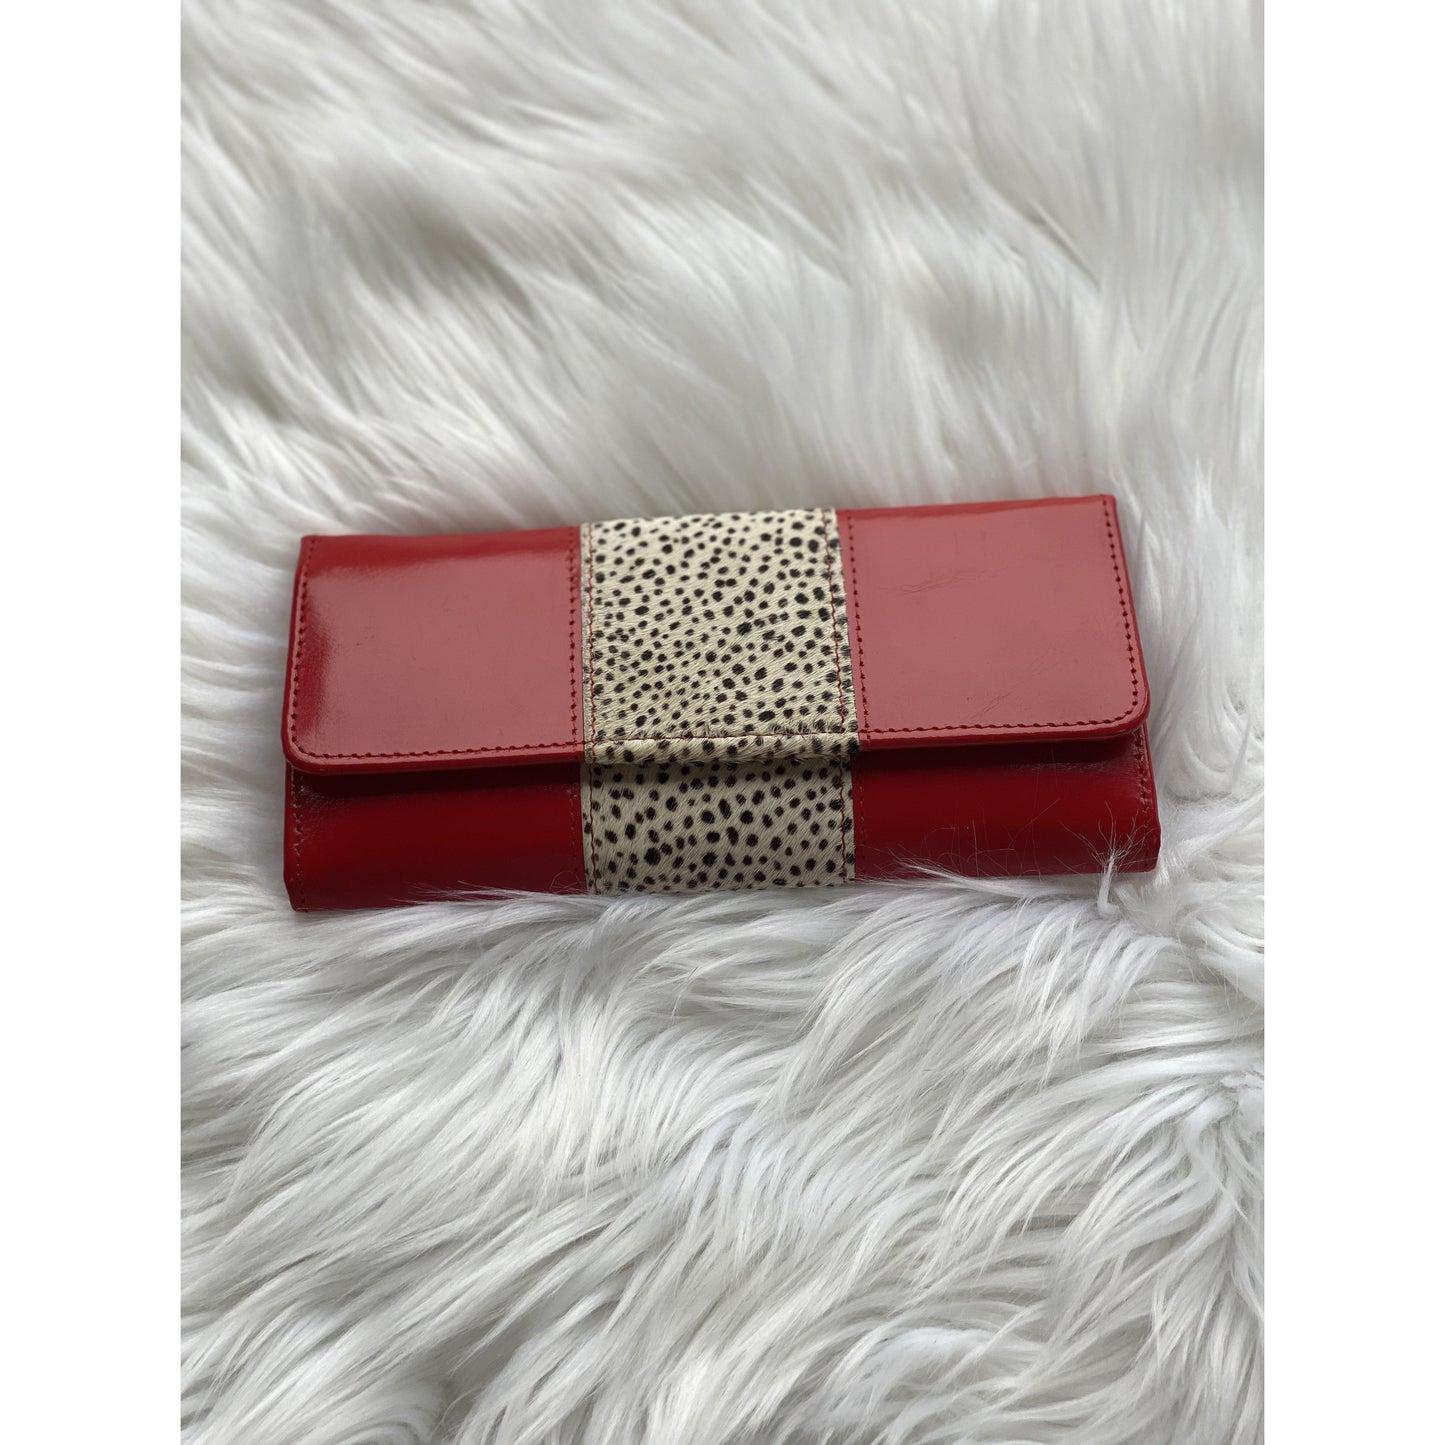 Bria Leather Wallet Bright Red Cheetah